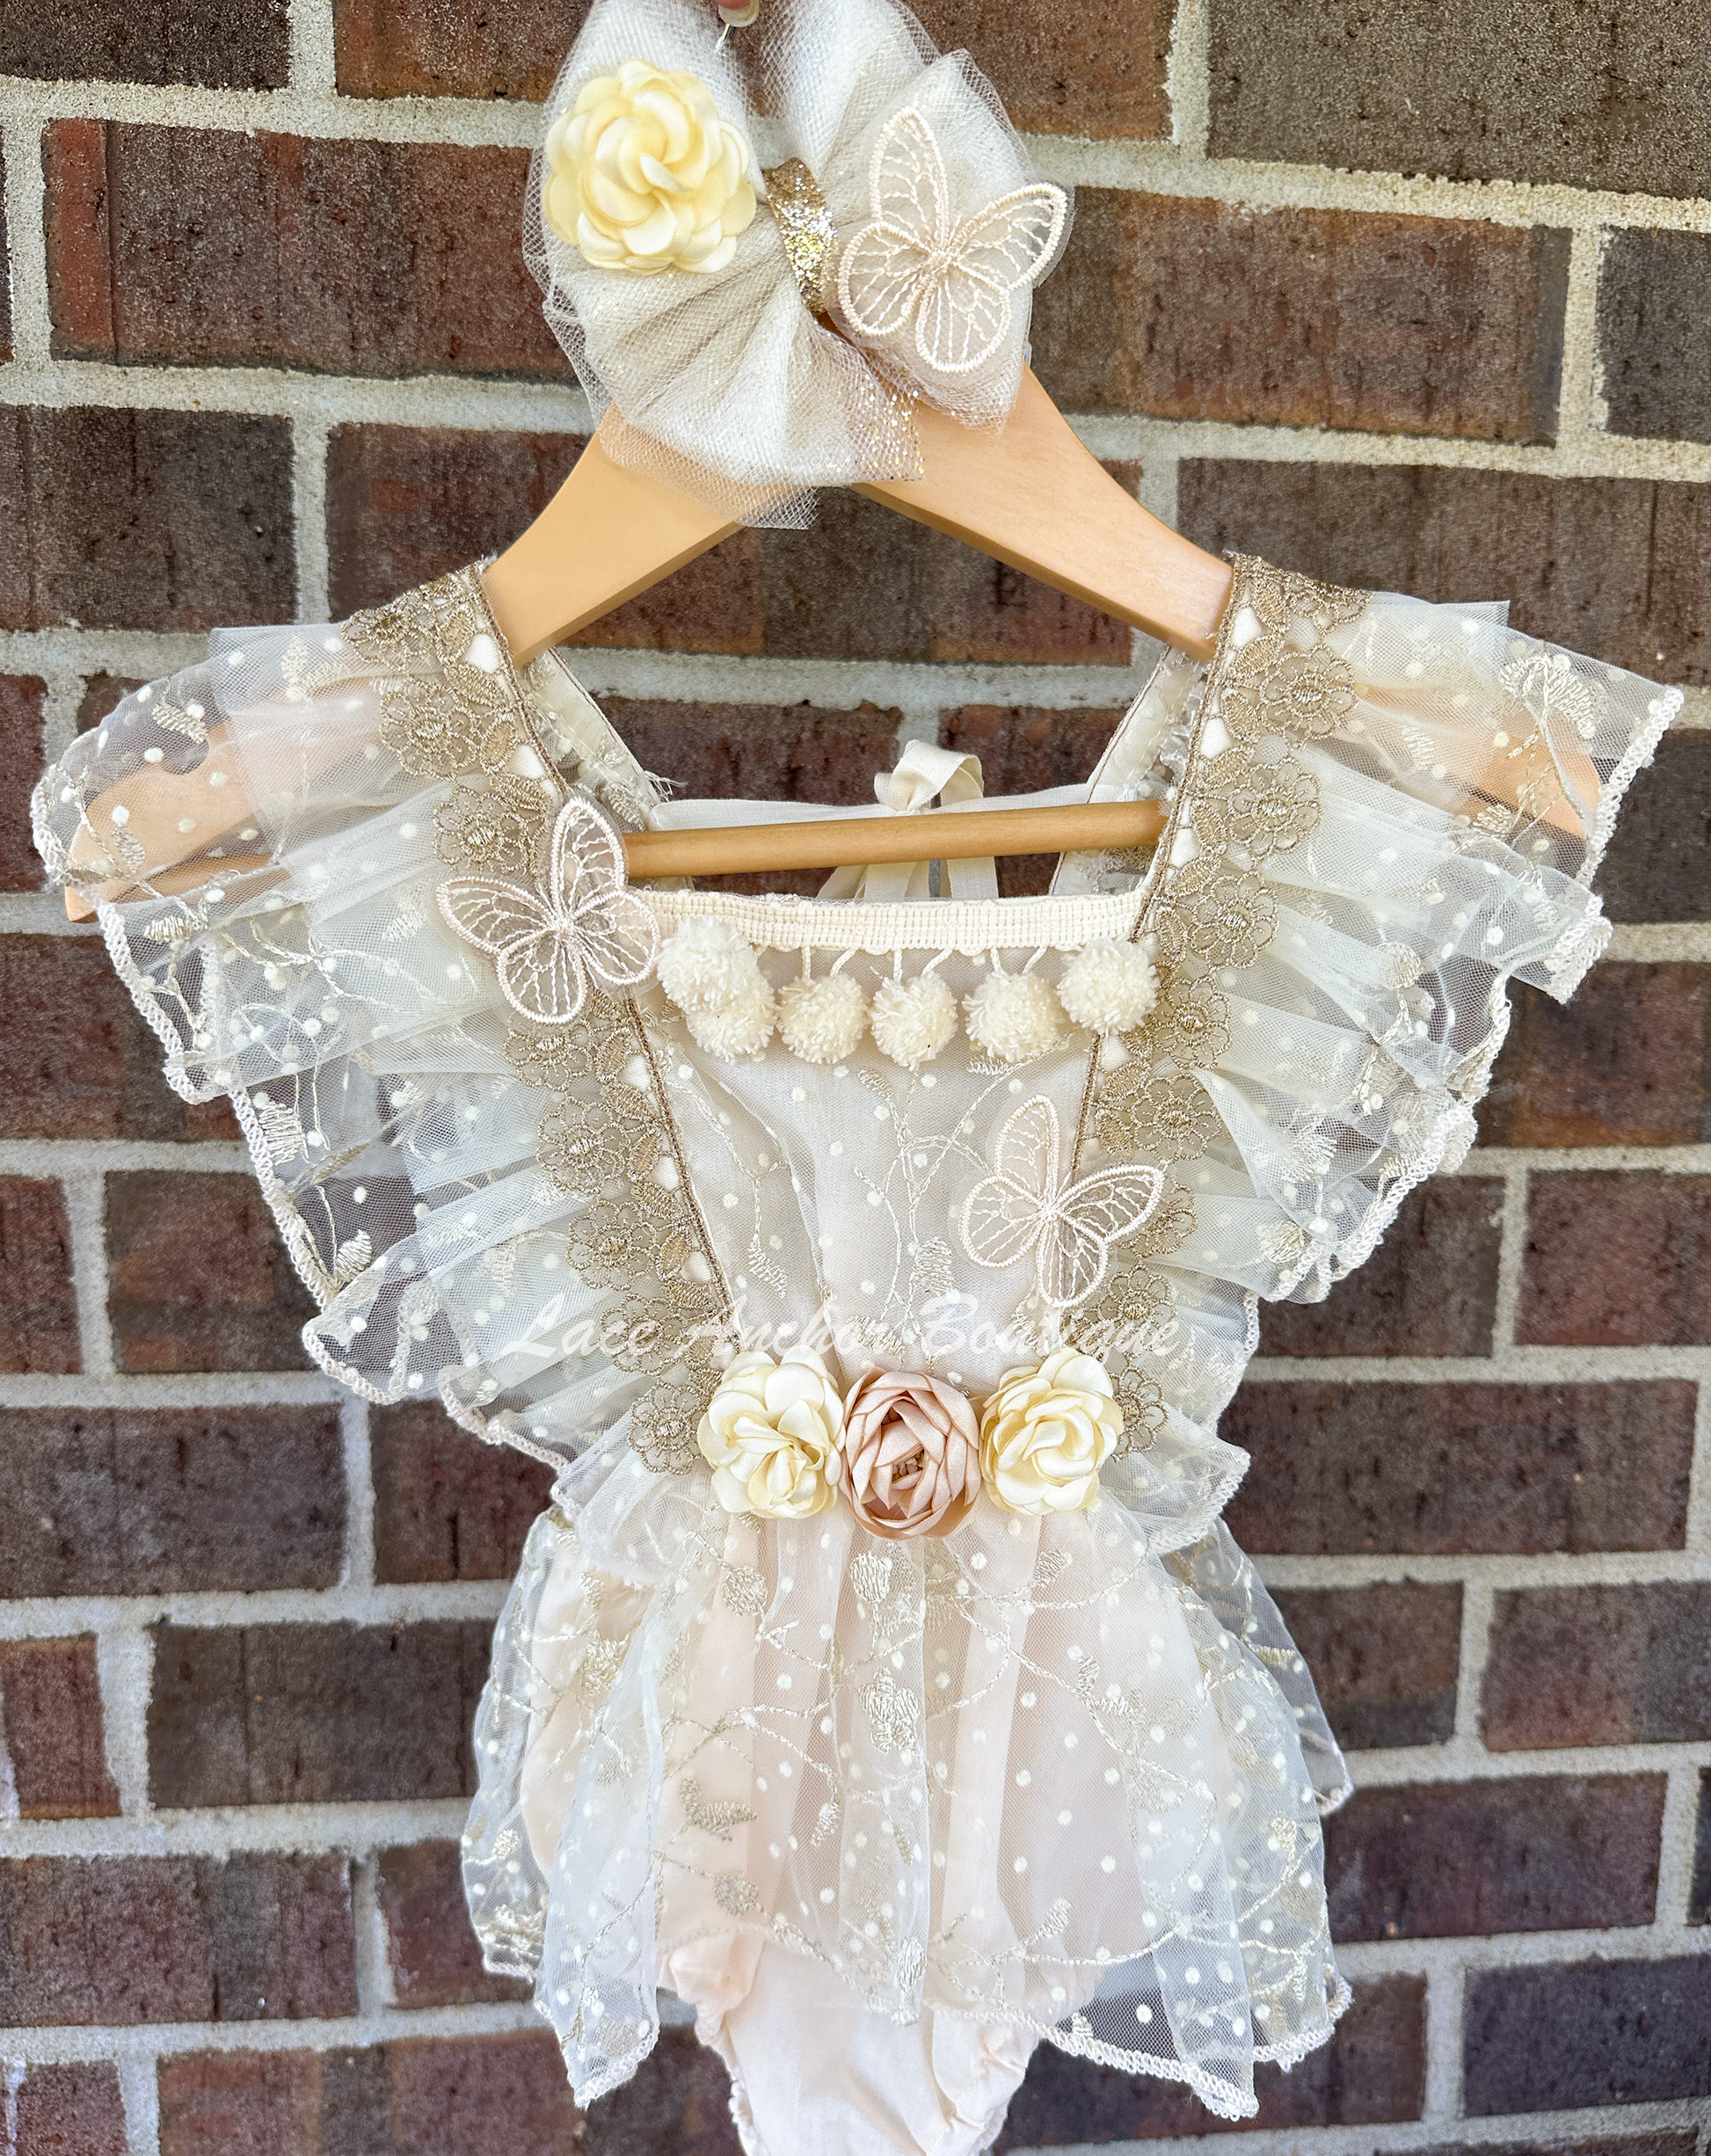 cream beige embroidered baby girls romper with golden flower details, silky d flowers, and butterflies/